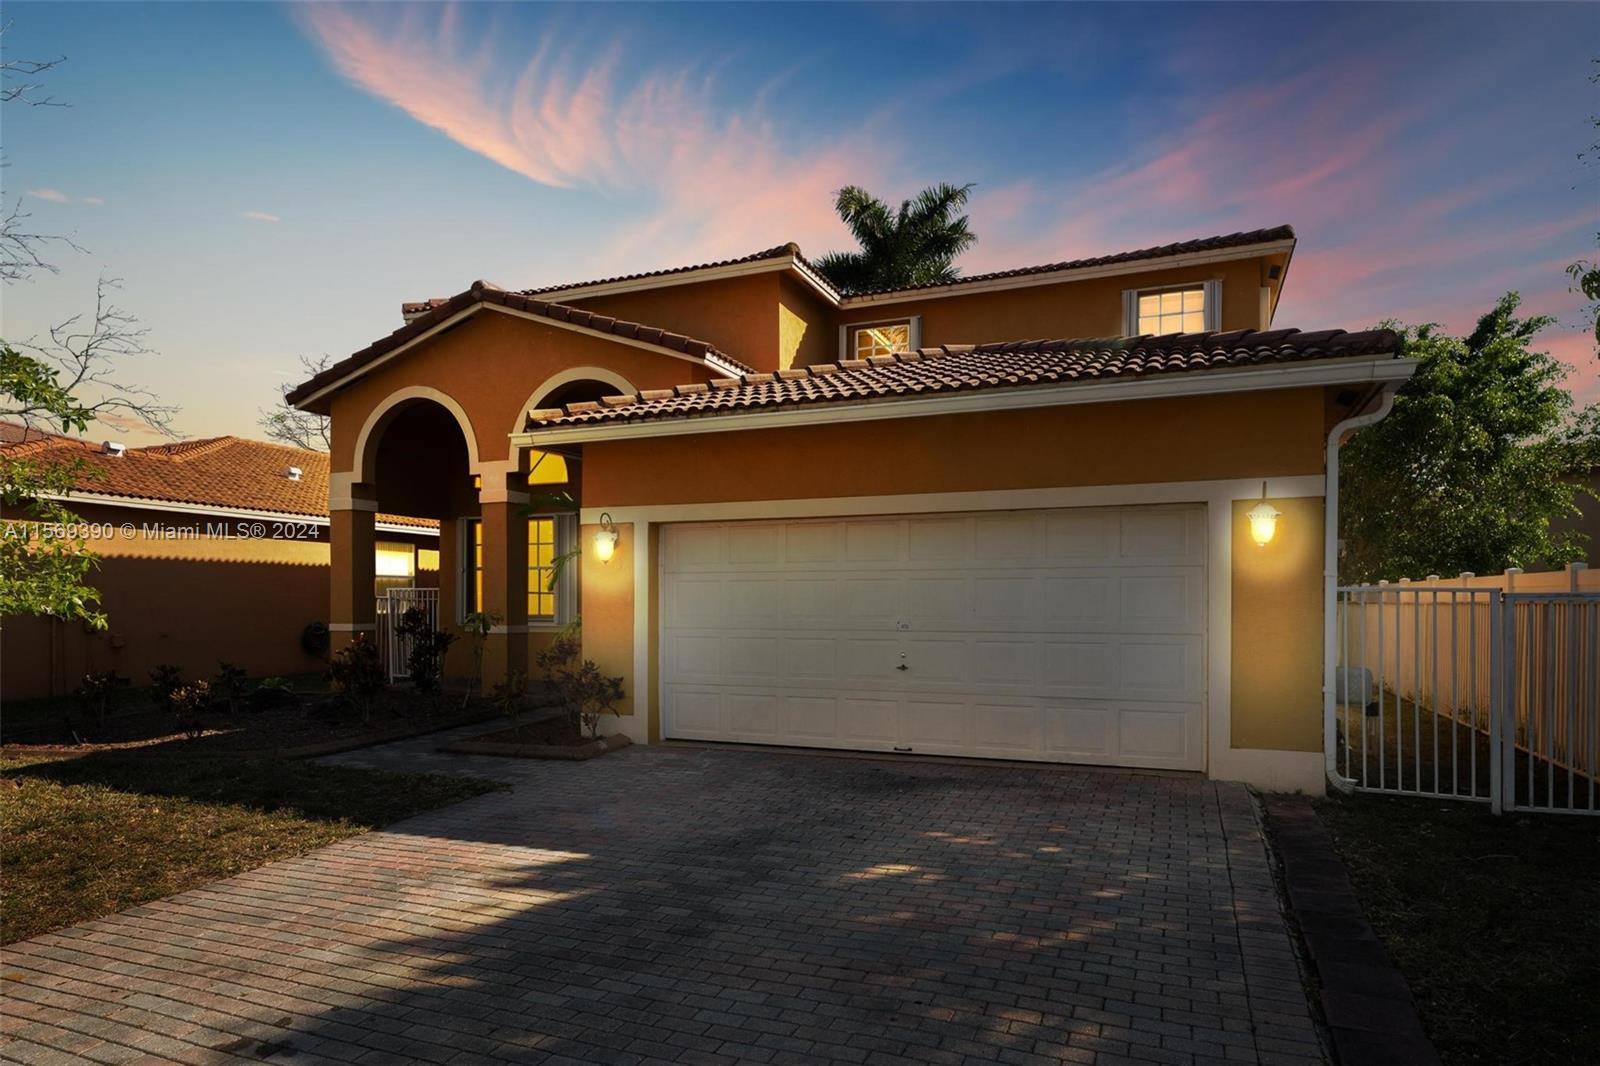 4 bedroom, 3 bathroom home located in the highly sought after Vizcaya community in Miramar.